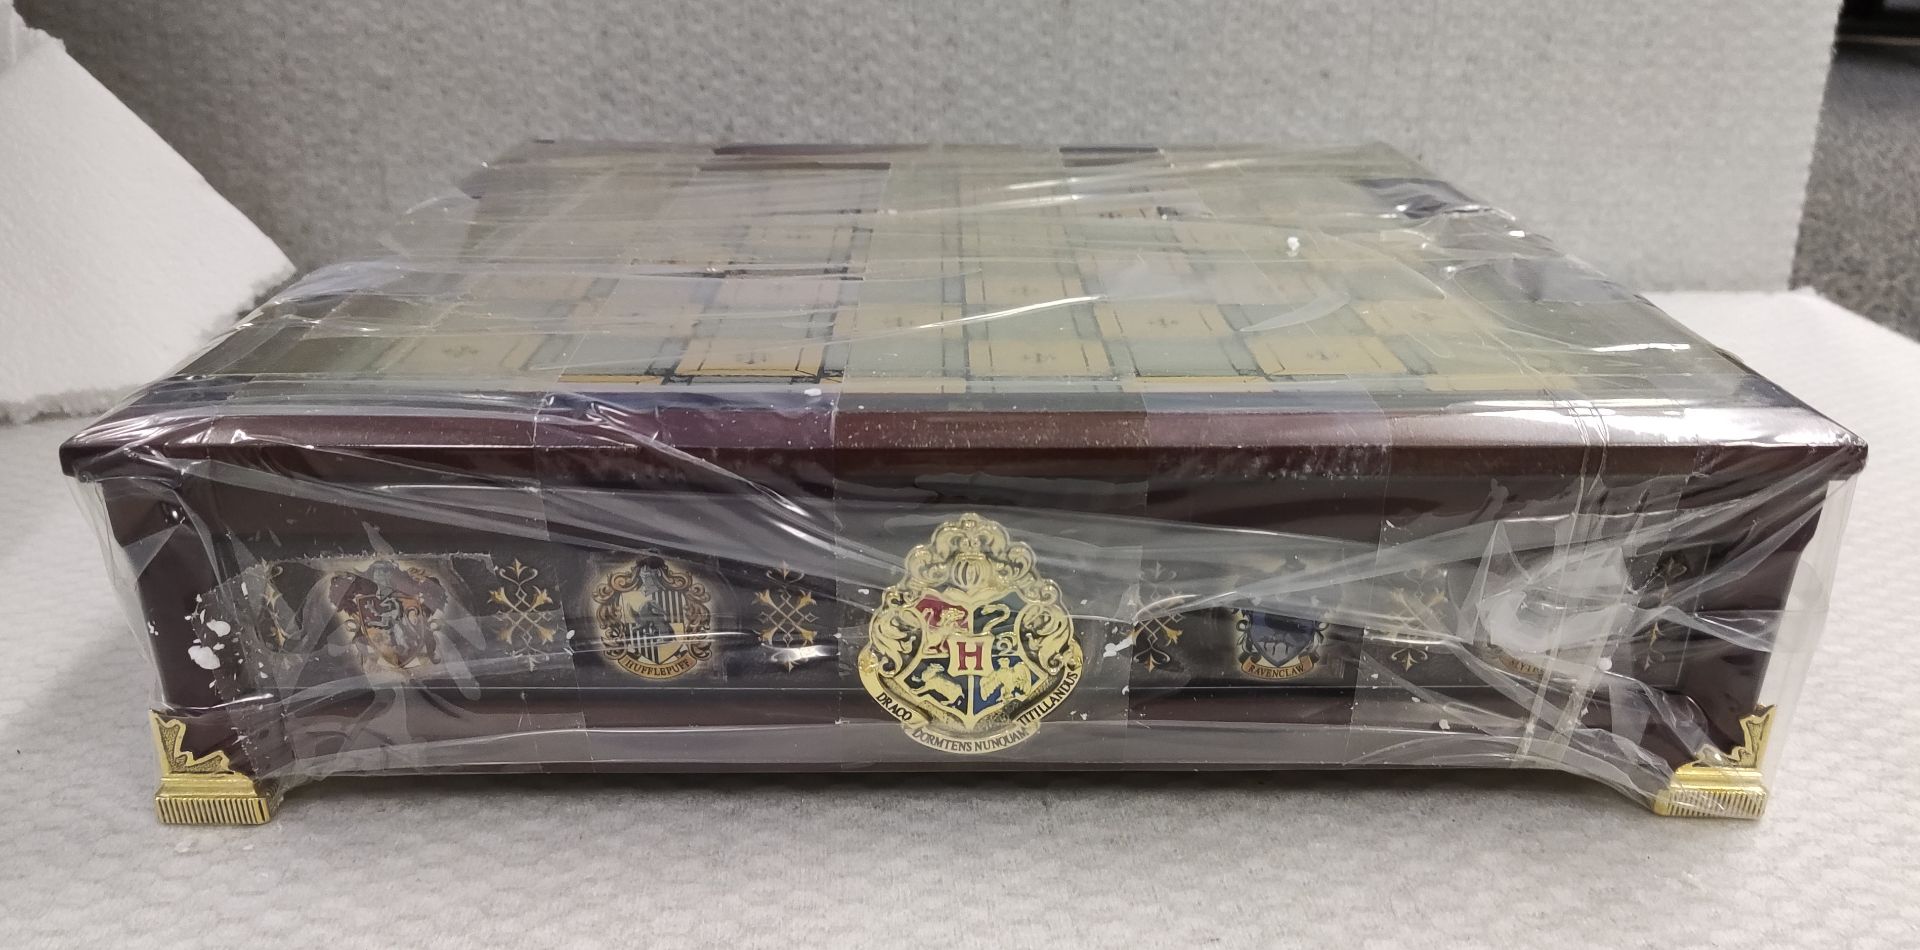 1 x Harry Potter Silver & Gold Plated Quidditch Chess Set by The Noble Collection - New/Boxed - Image 10 of 11